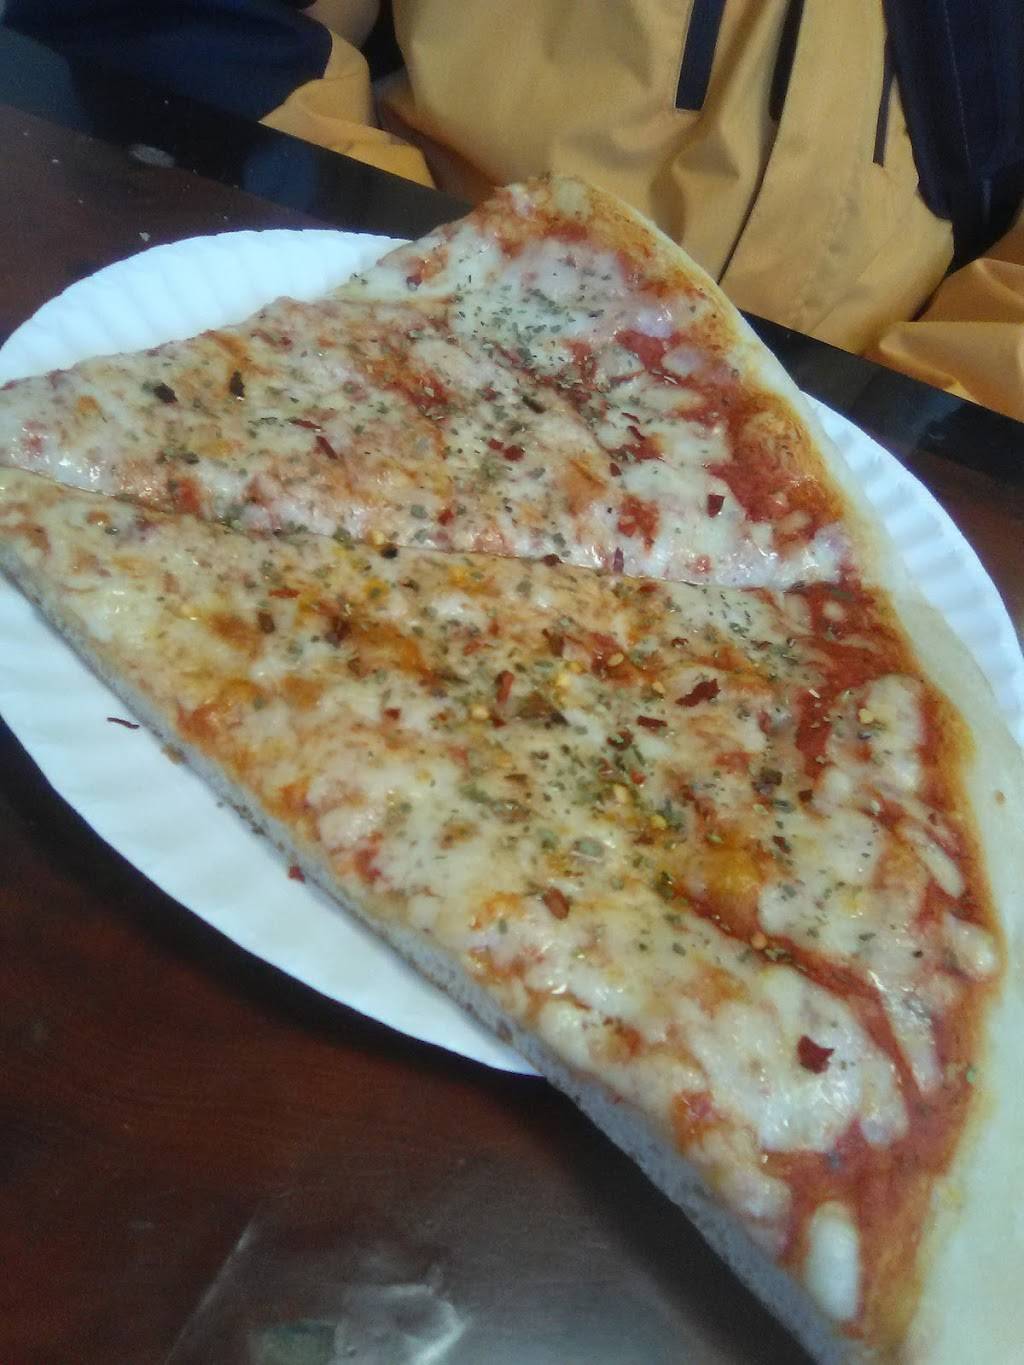 99 Cent Pizza | restaurant | 50 Sip Ave, Jersey City, NJ 07306, USA | 2014204800 OR +1 201-420-4800